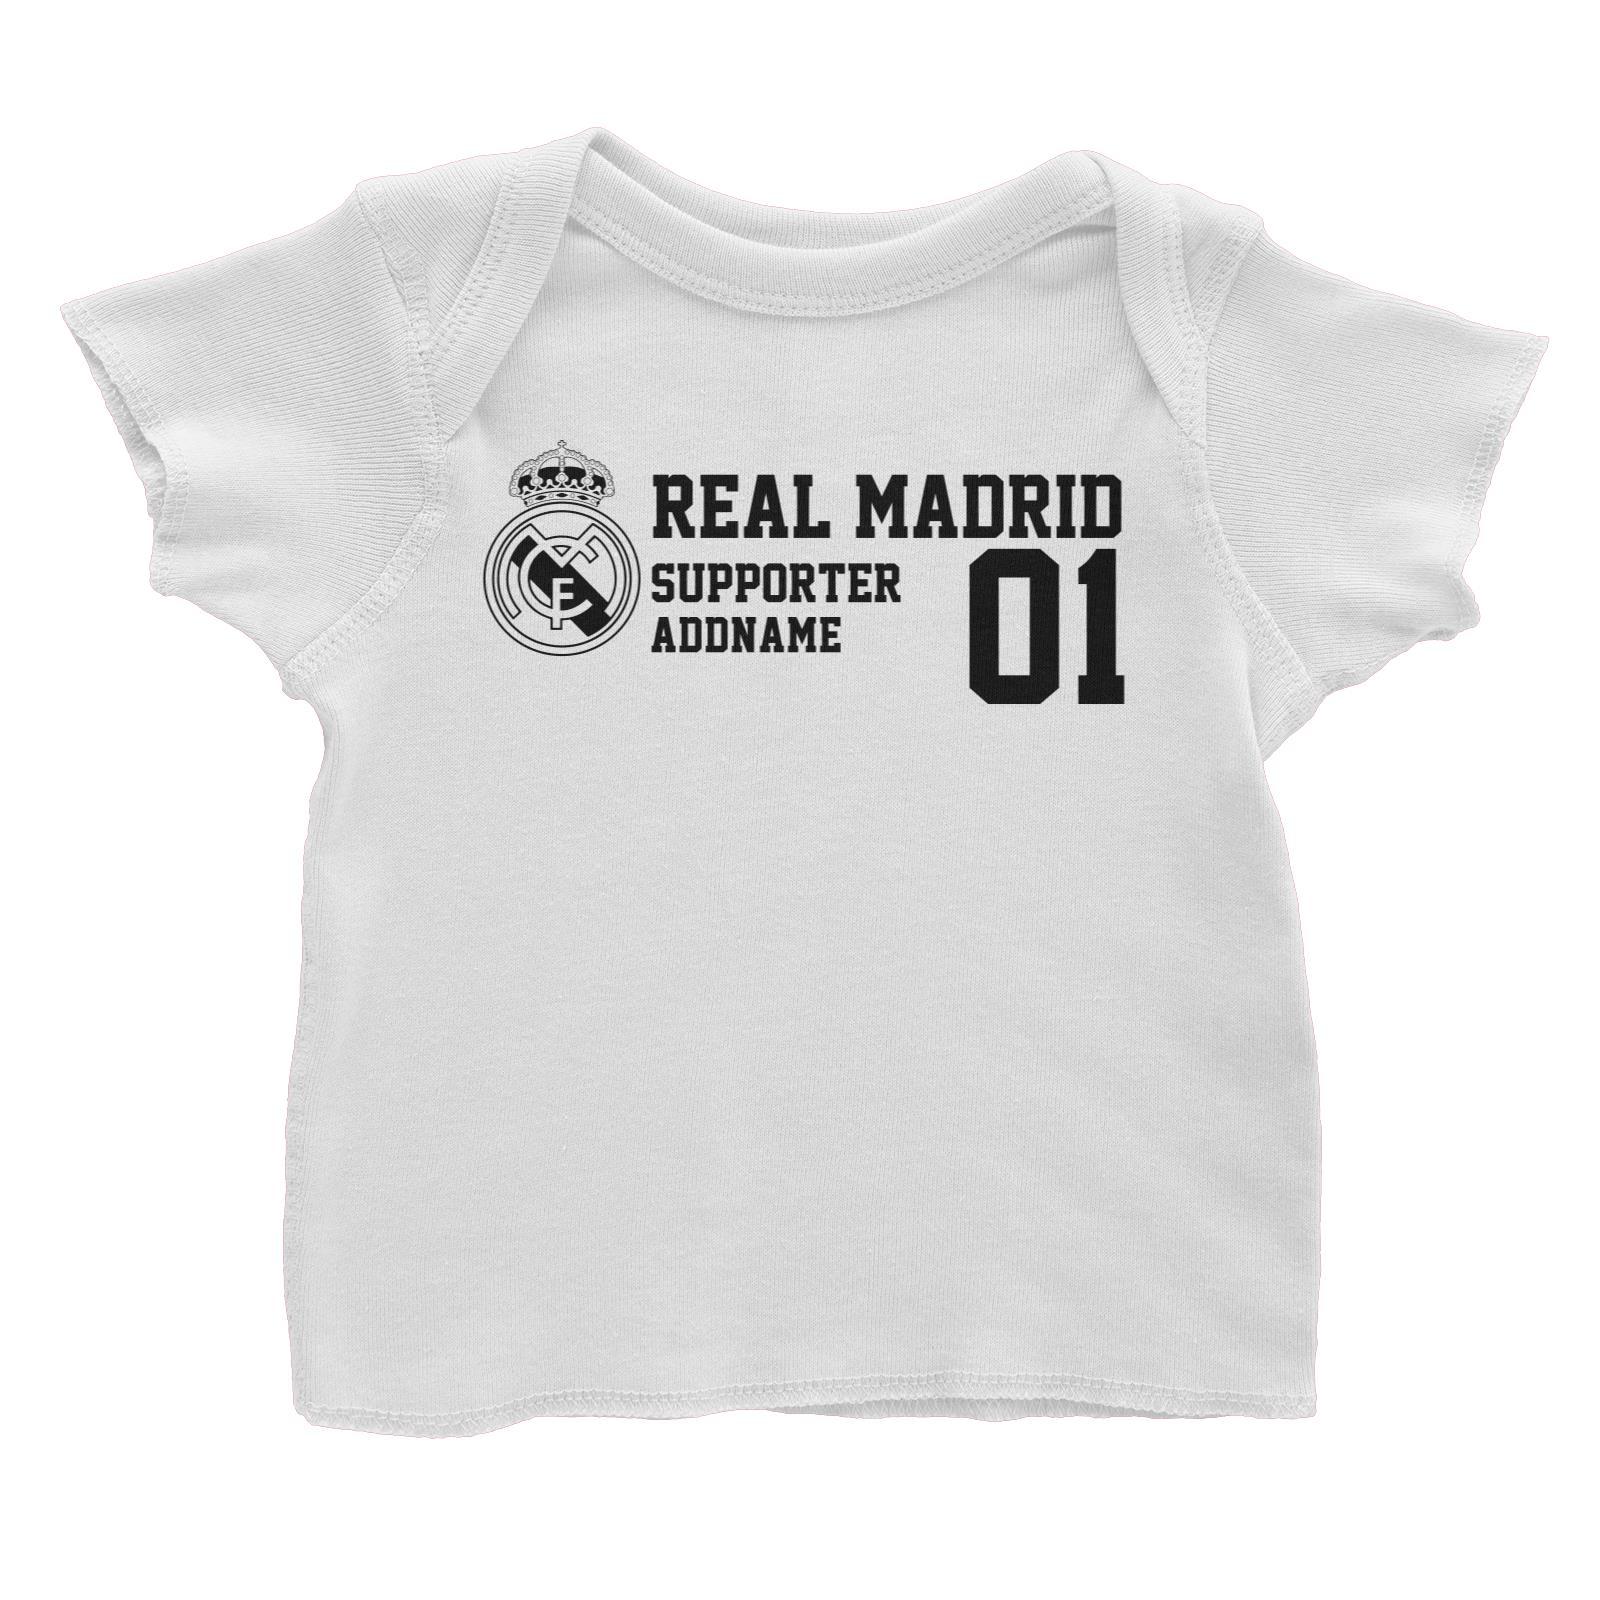 Real Madrid Football Supporter Addname Baby T-Shirt